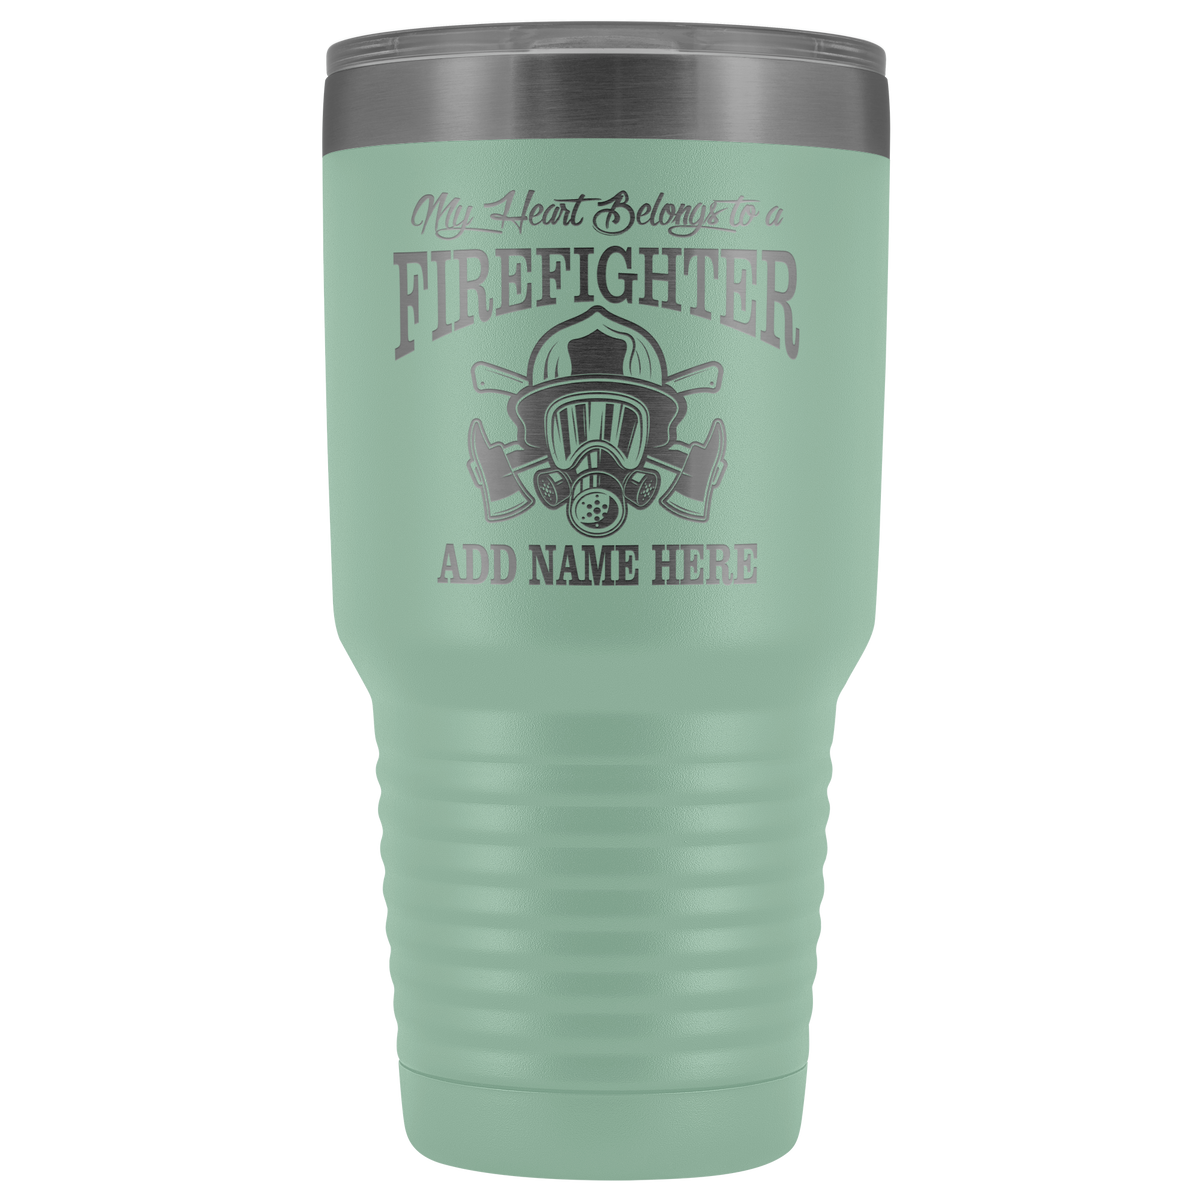 My Heart Belongs to a Firefighter Your Name Here 30oz Tumbler